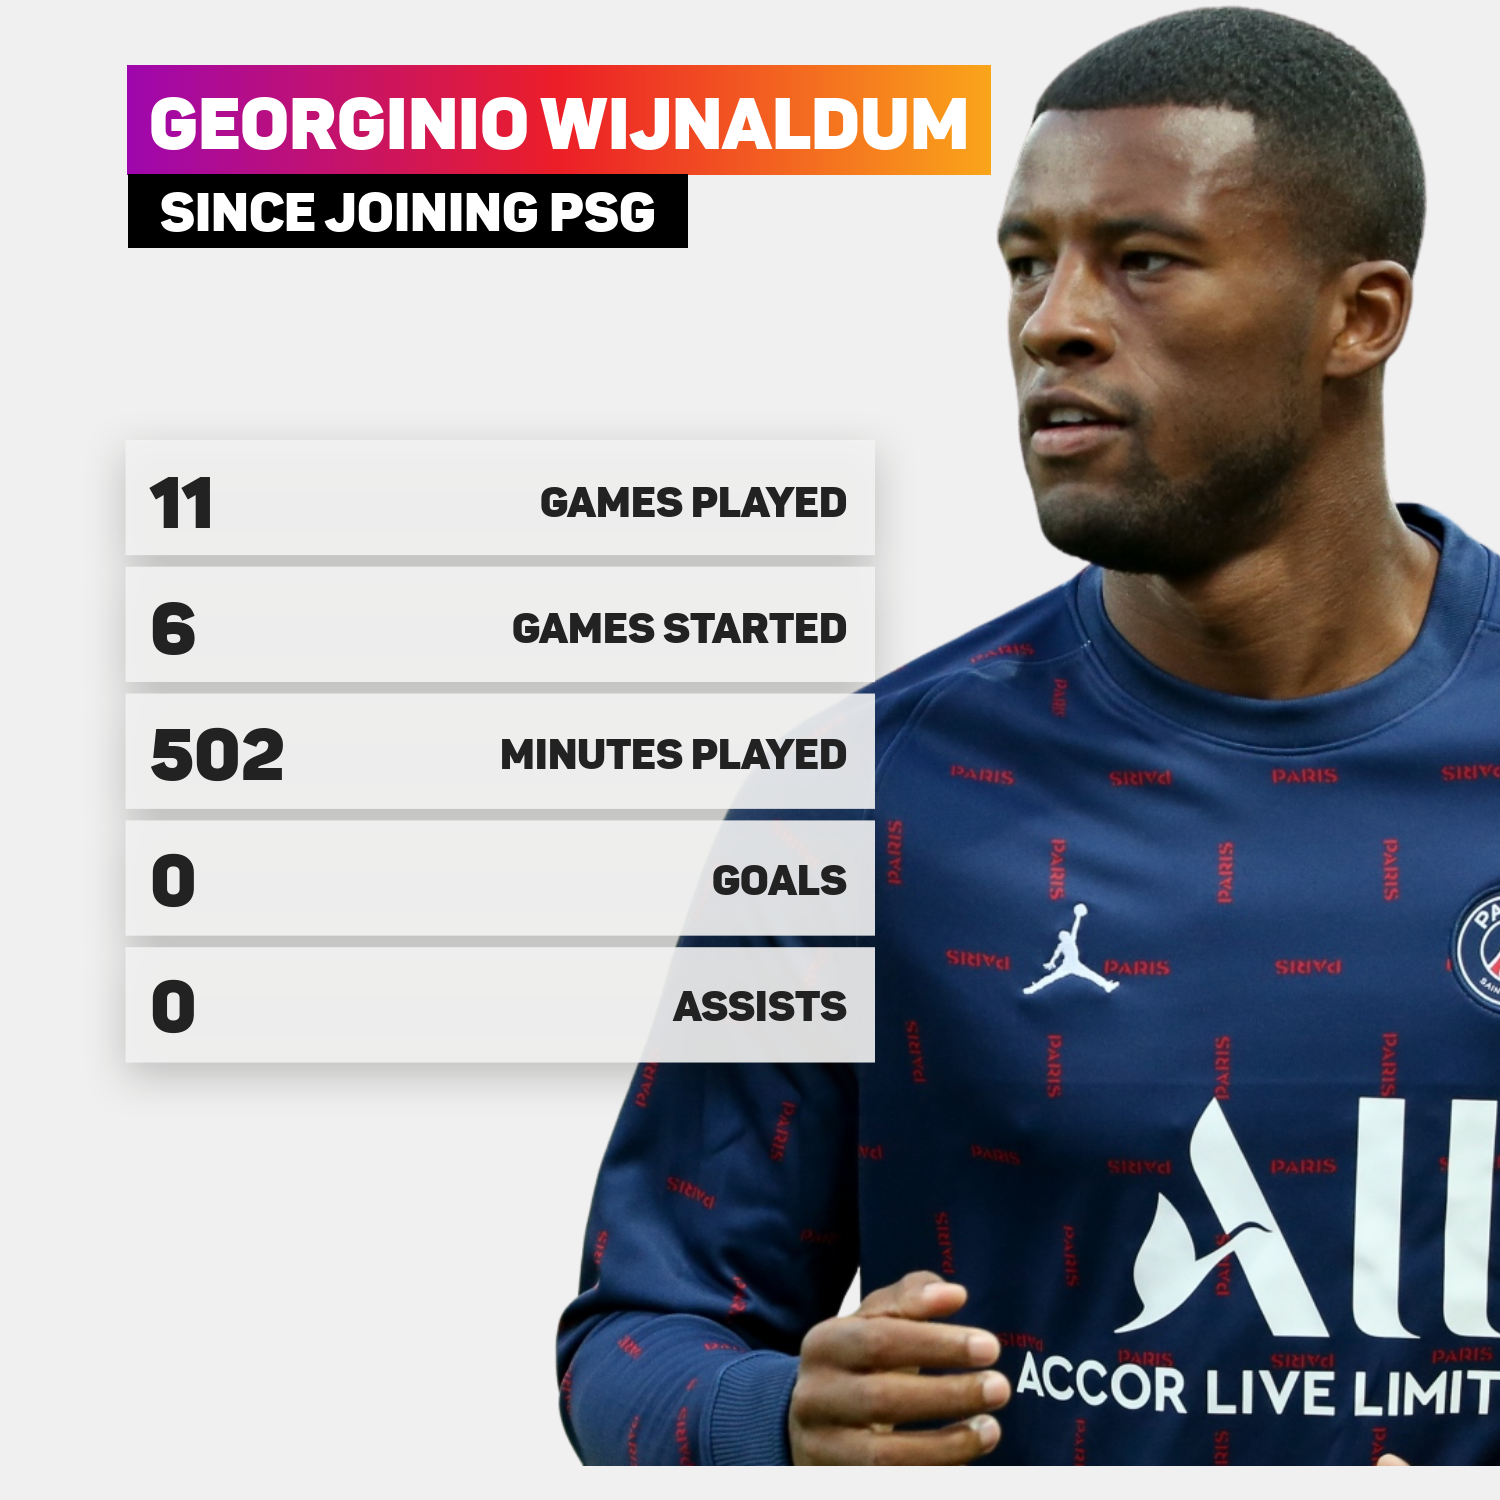 Georginio Wijnaldum has started six games for PSG since joining